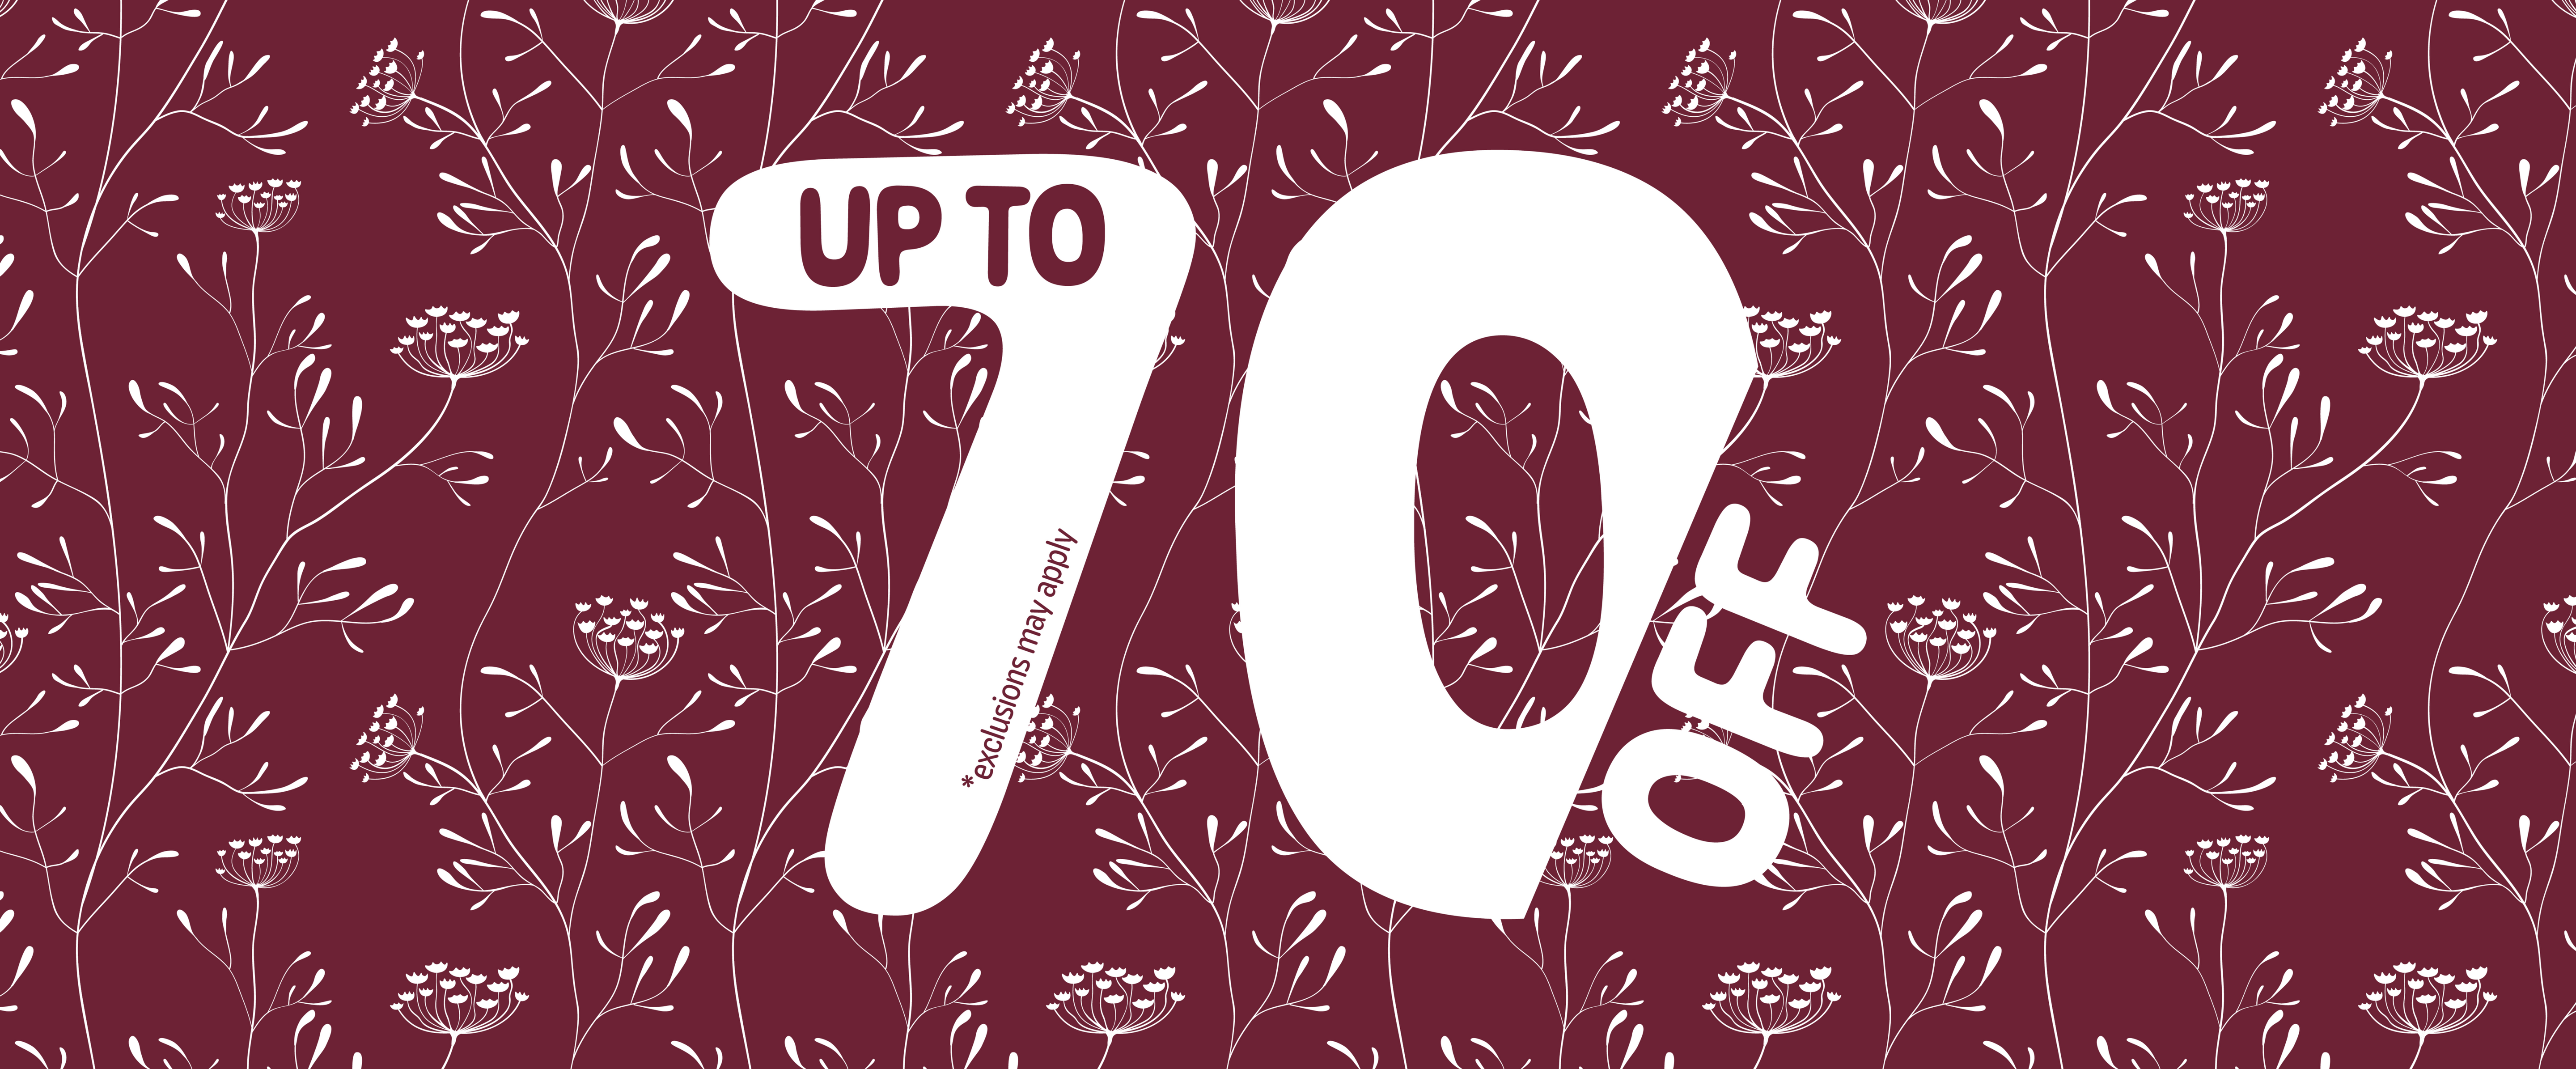 Petit Bateau OUTLET in Germany • Sale up to 70%* off